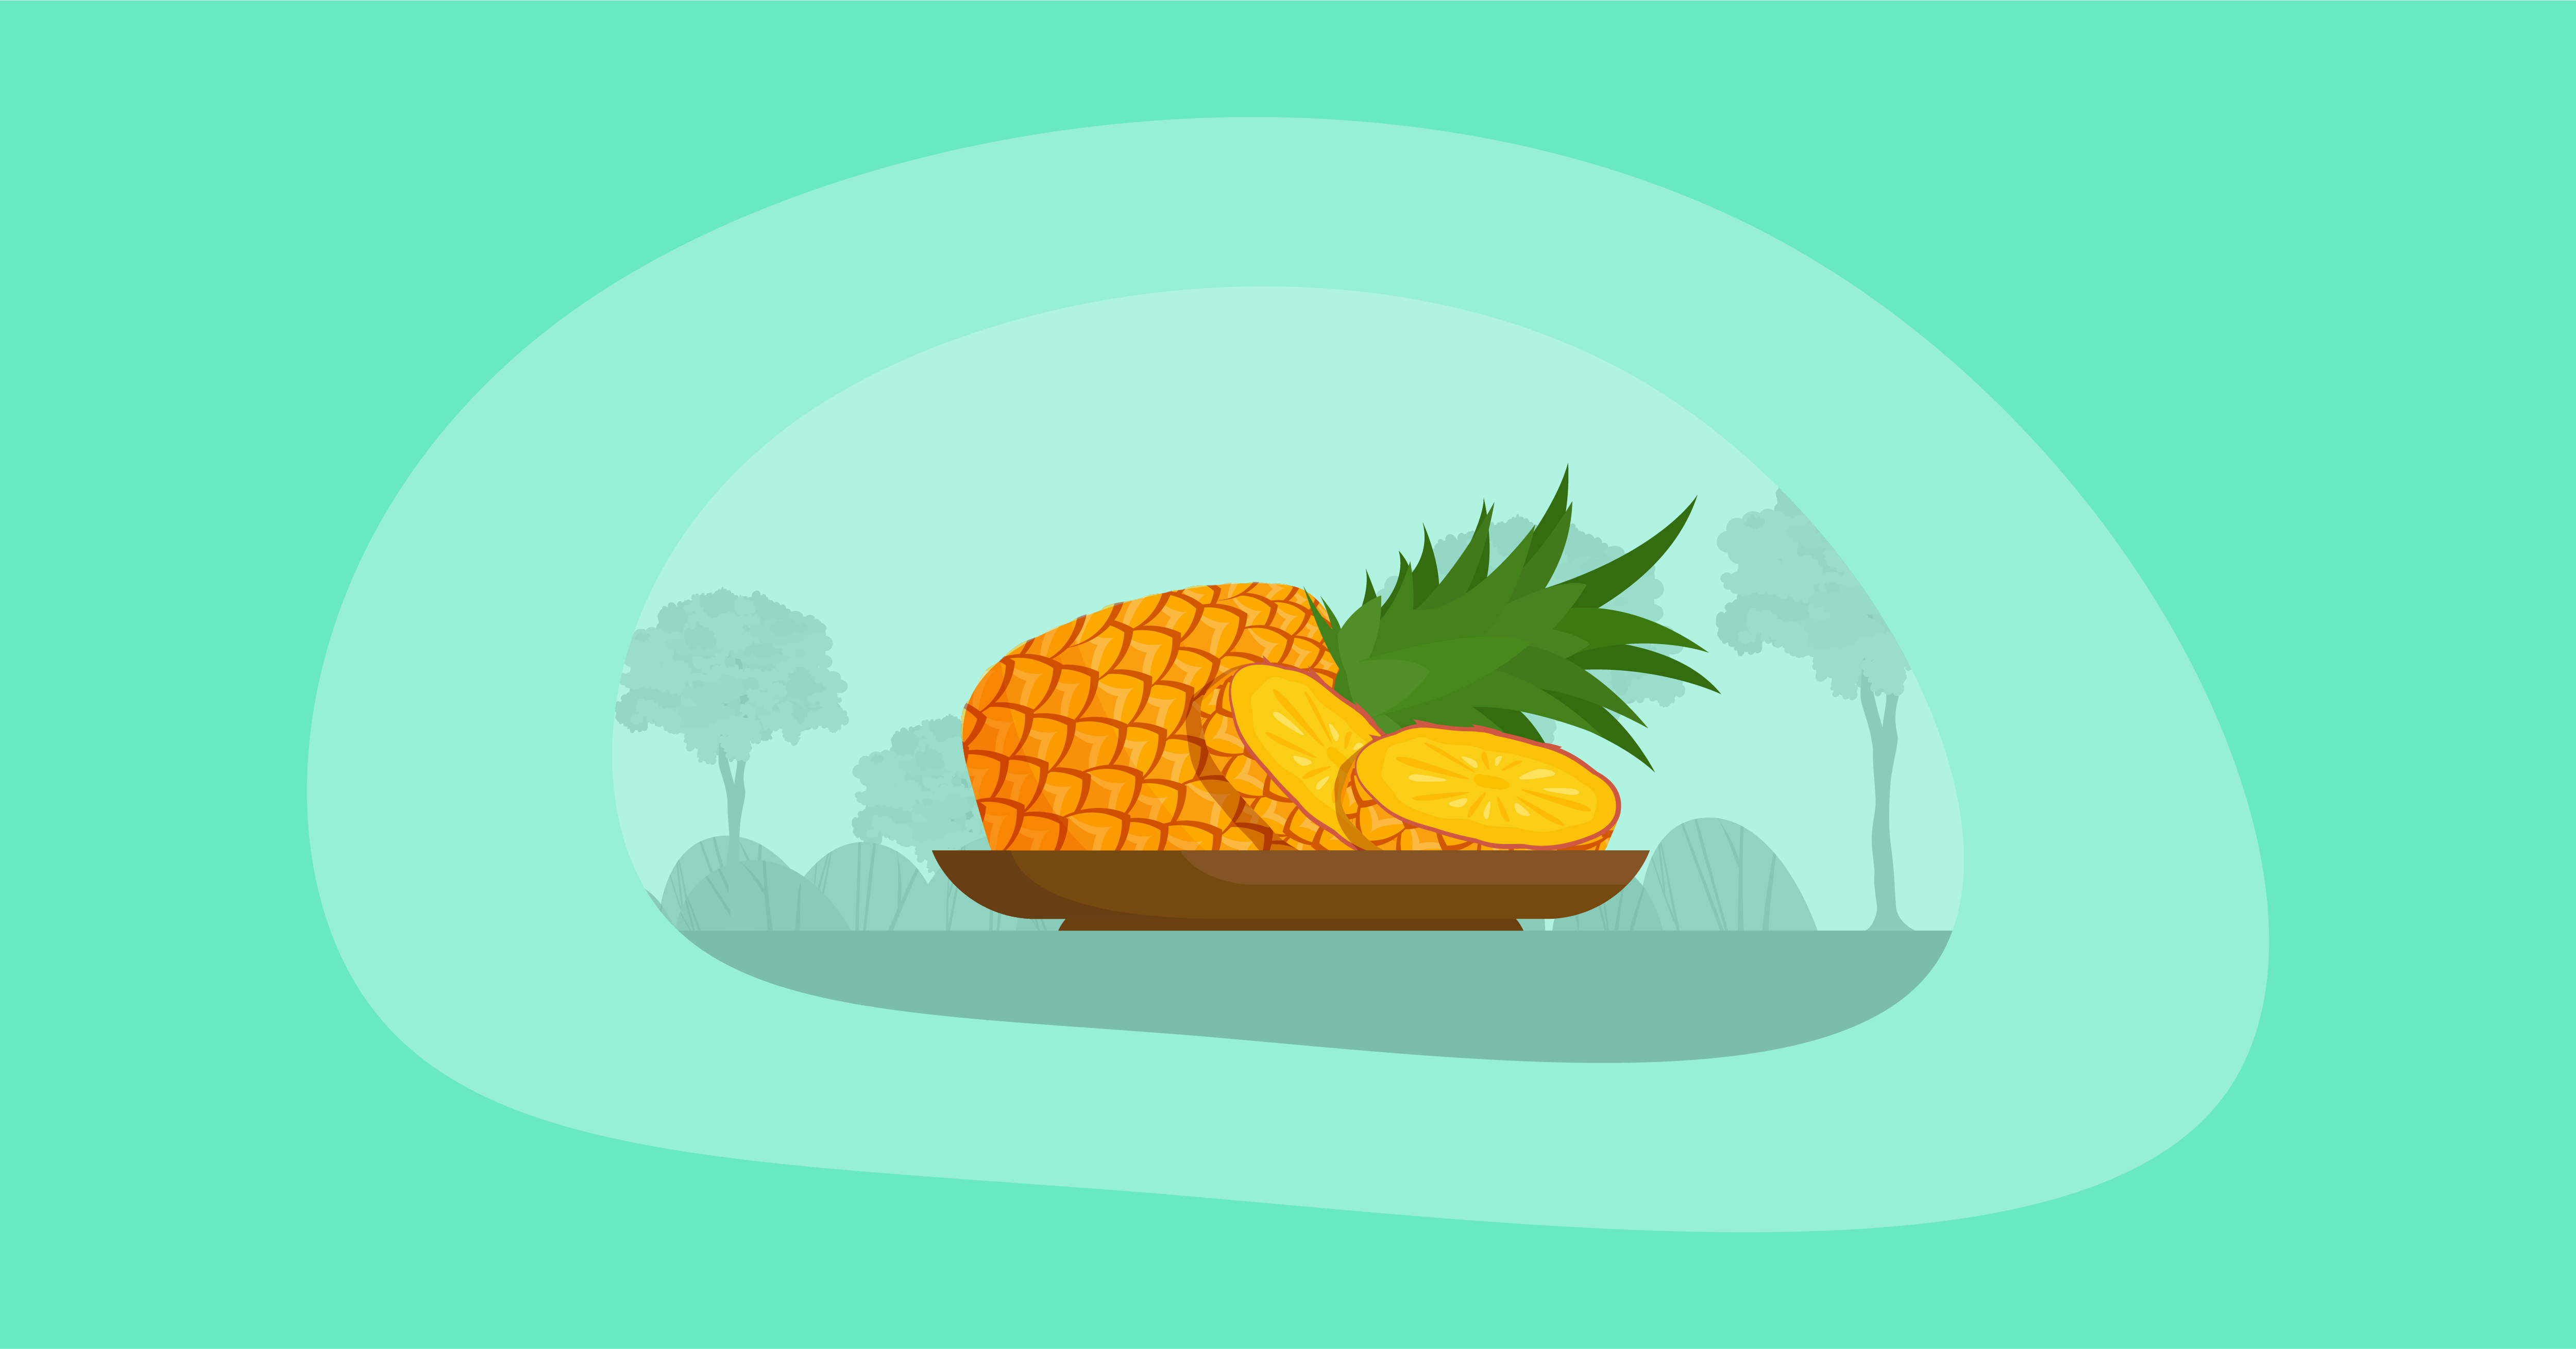 Illustration of pineapples in a wooden platter